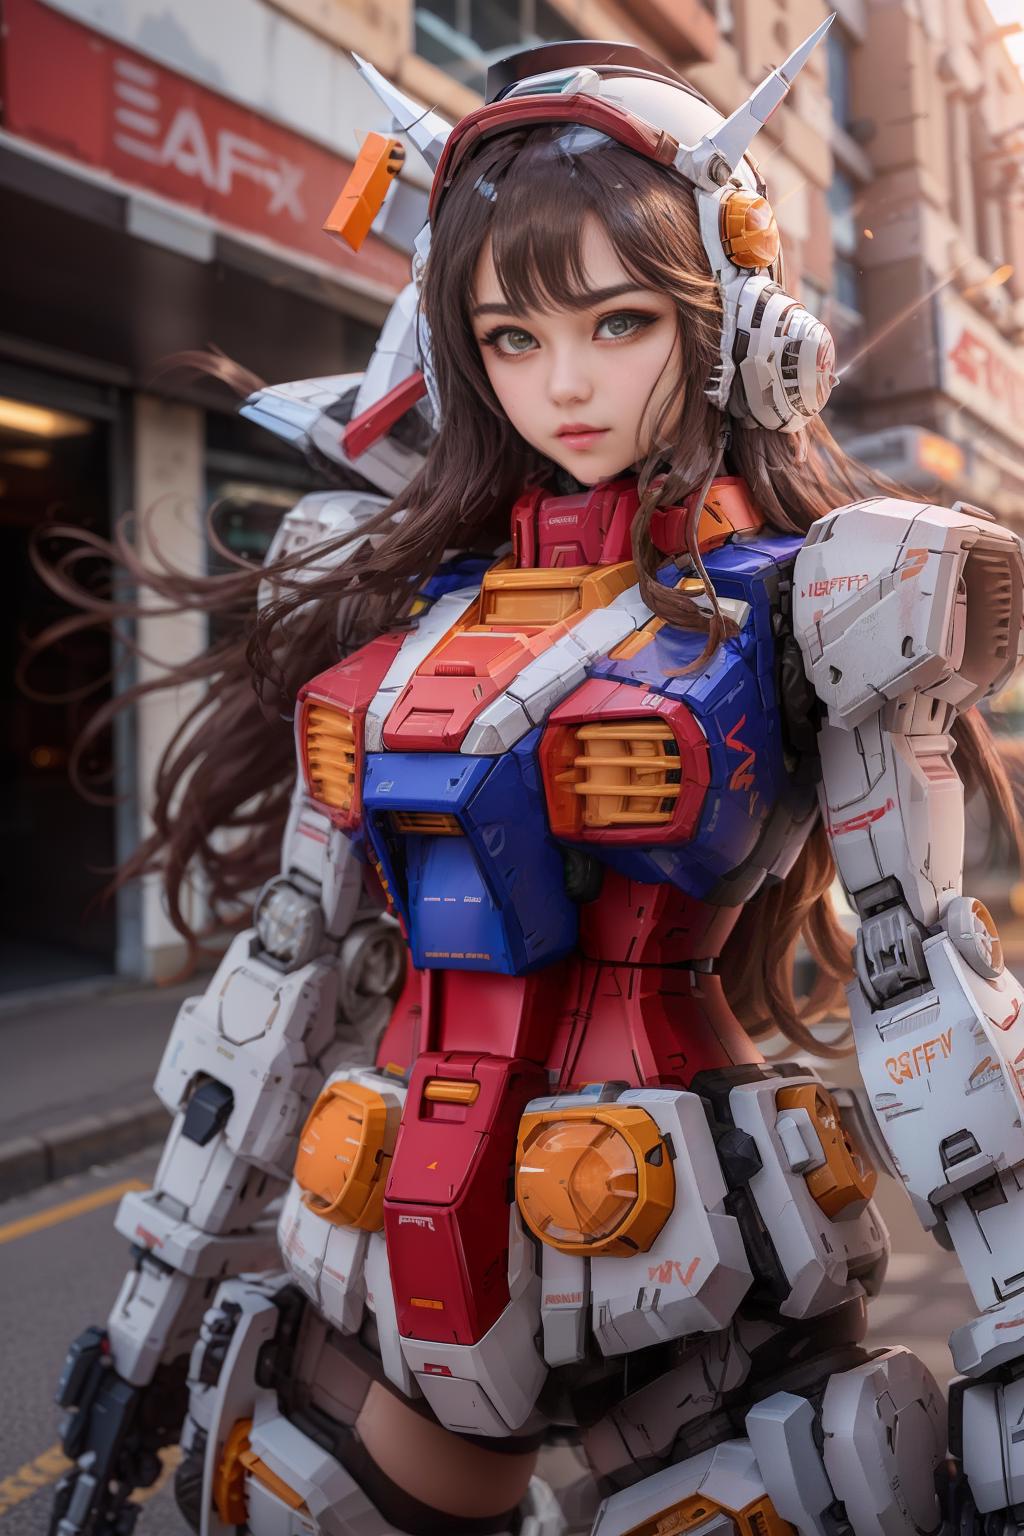 A beautiful anime girl wearing a white, red, blue, and orange costume stands in front of a building.